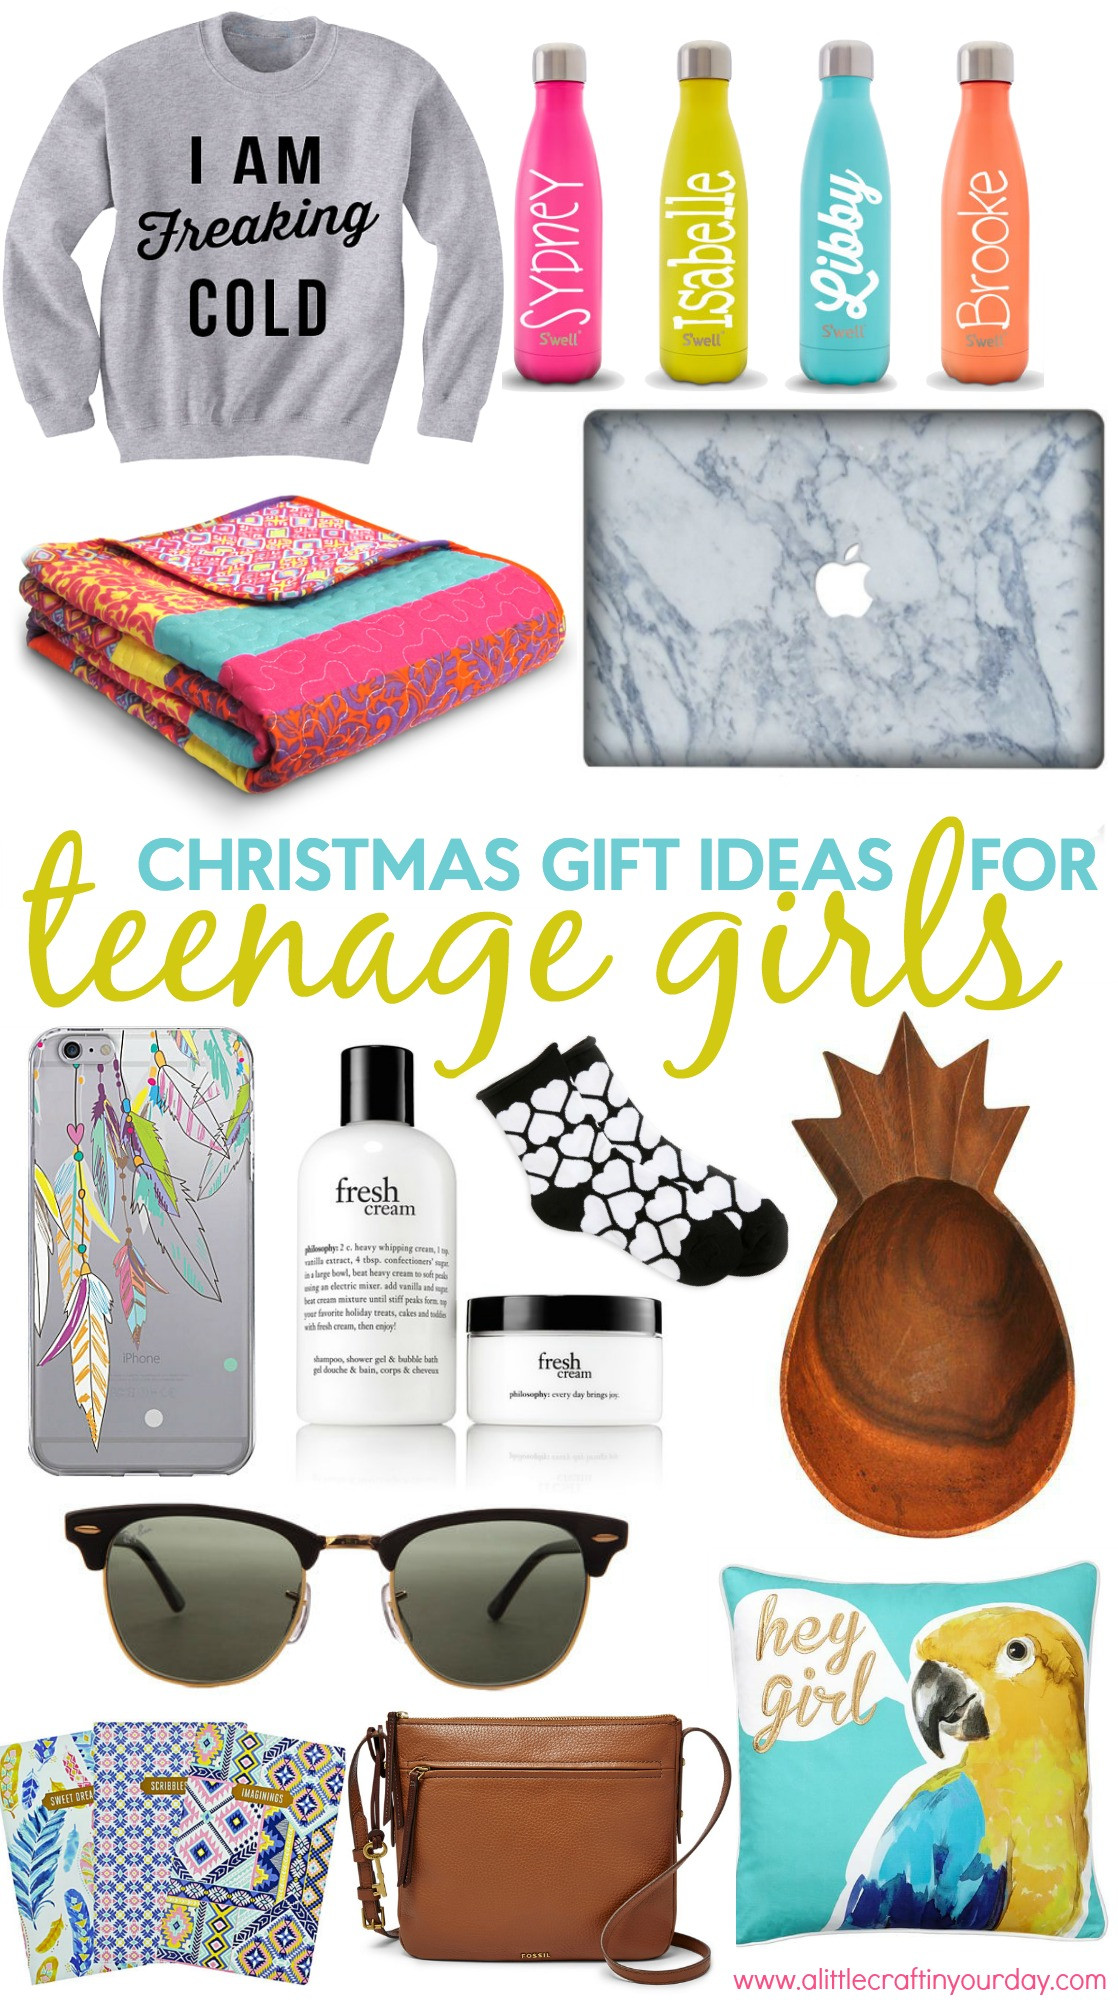 Craft Gift Ideas For Girls
 Christmas Gift Ideas for Teen Girls A Little Craft In